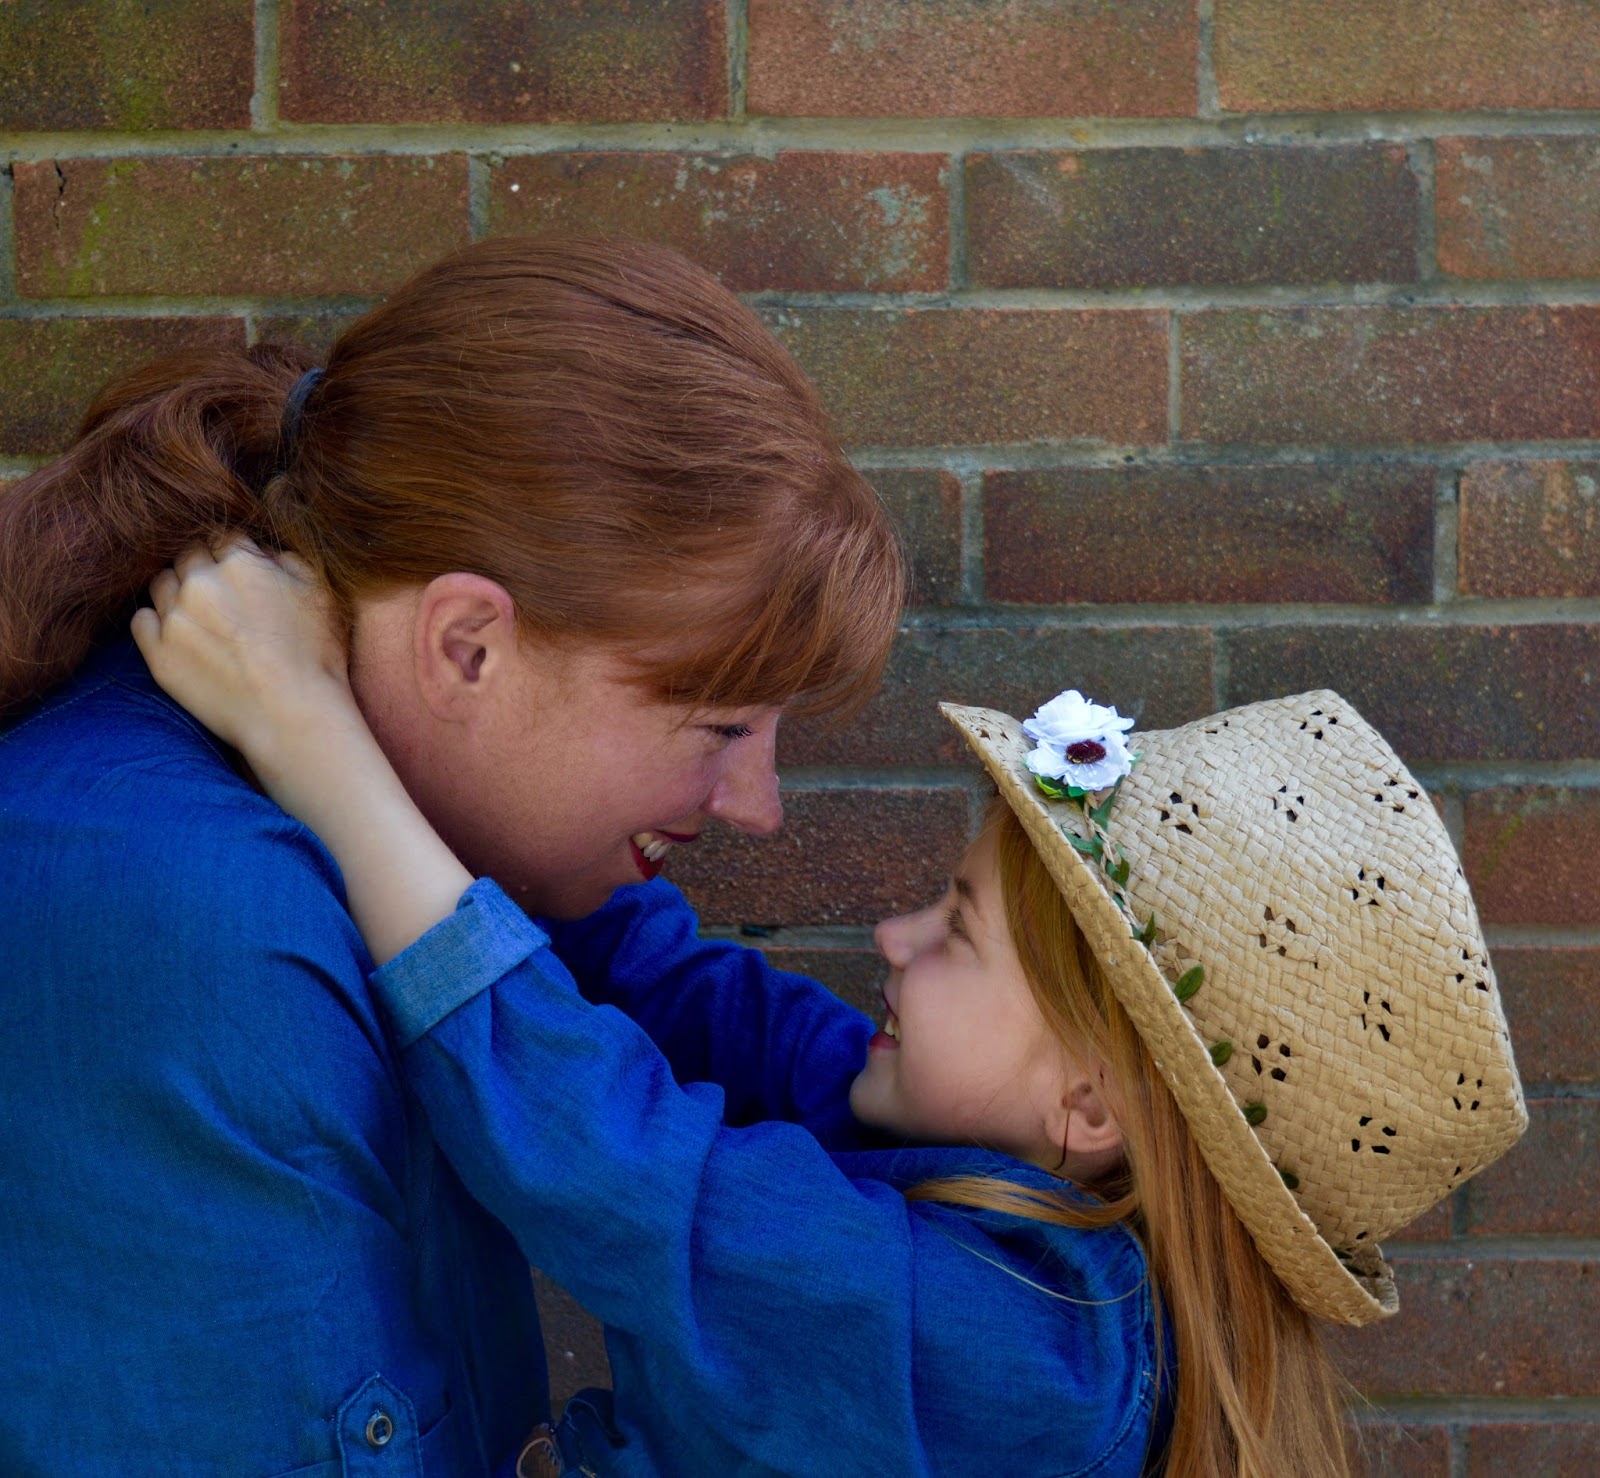 Matching mum & daughter Denim dress outfits from George at Asda as part of #GeorgeMiniMe